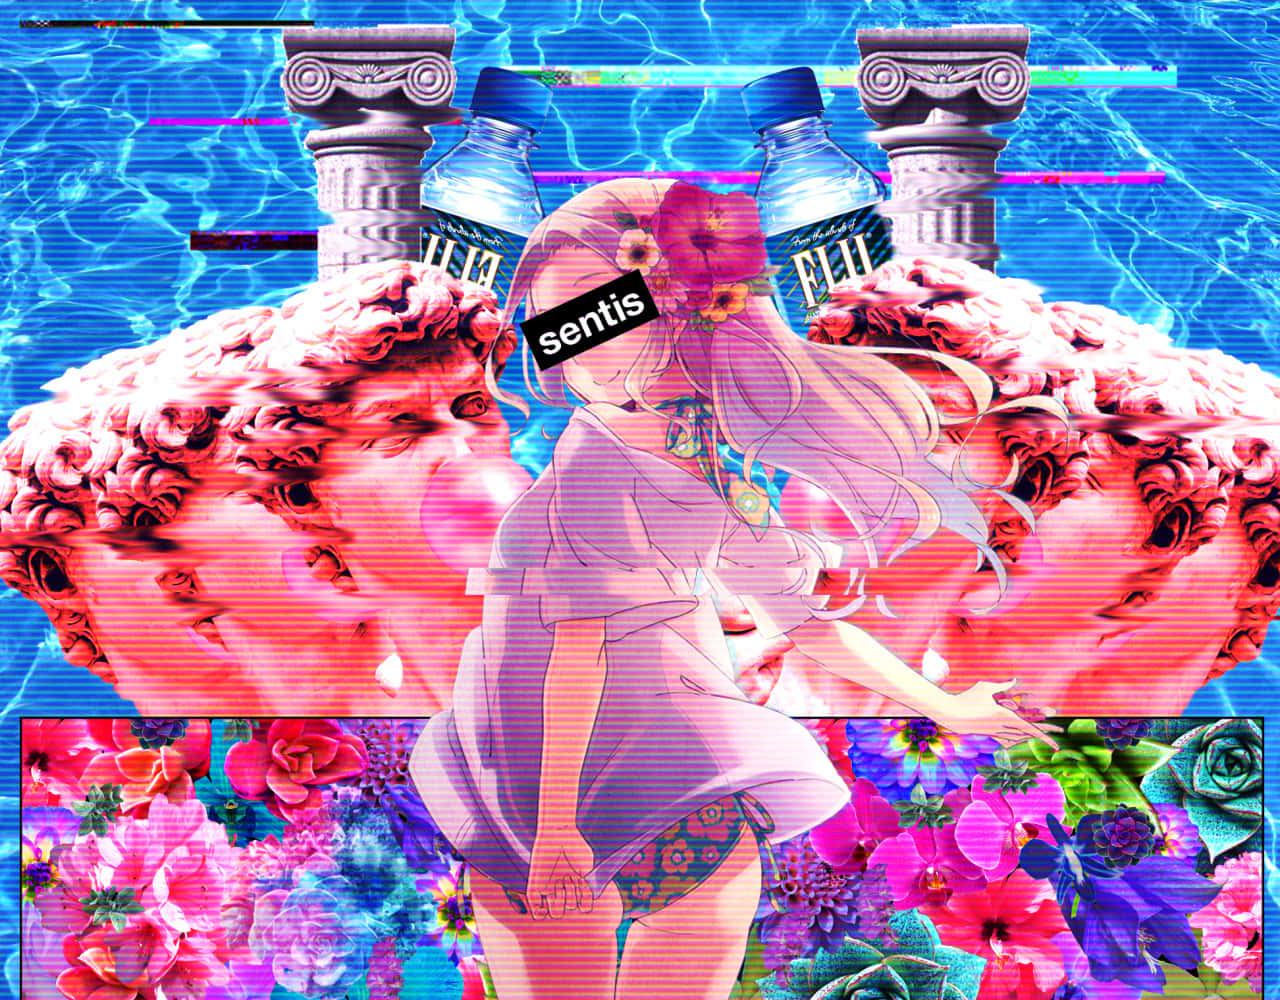 I made this ａｅｓｔｈｅｔｉｃ mobile wallpaper with the three best waifus lt3  vaporwave art  Anime wallpaper phone Vaporwave wallpaper Mobile  wallpaper